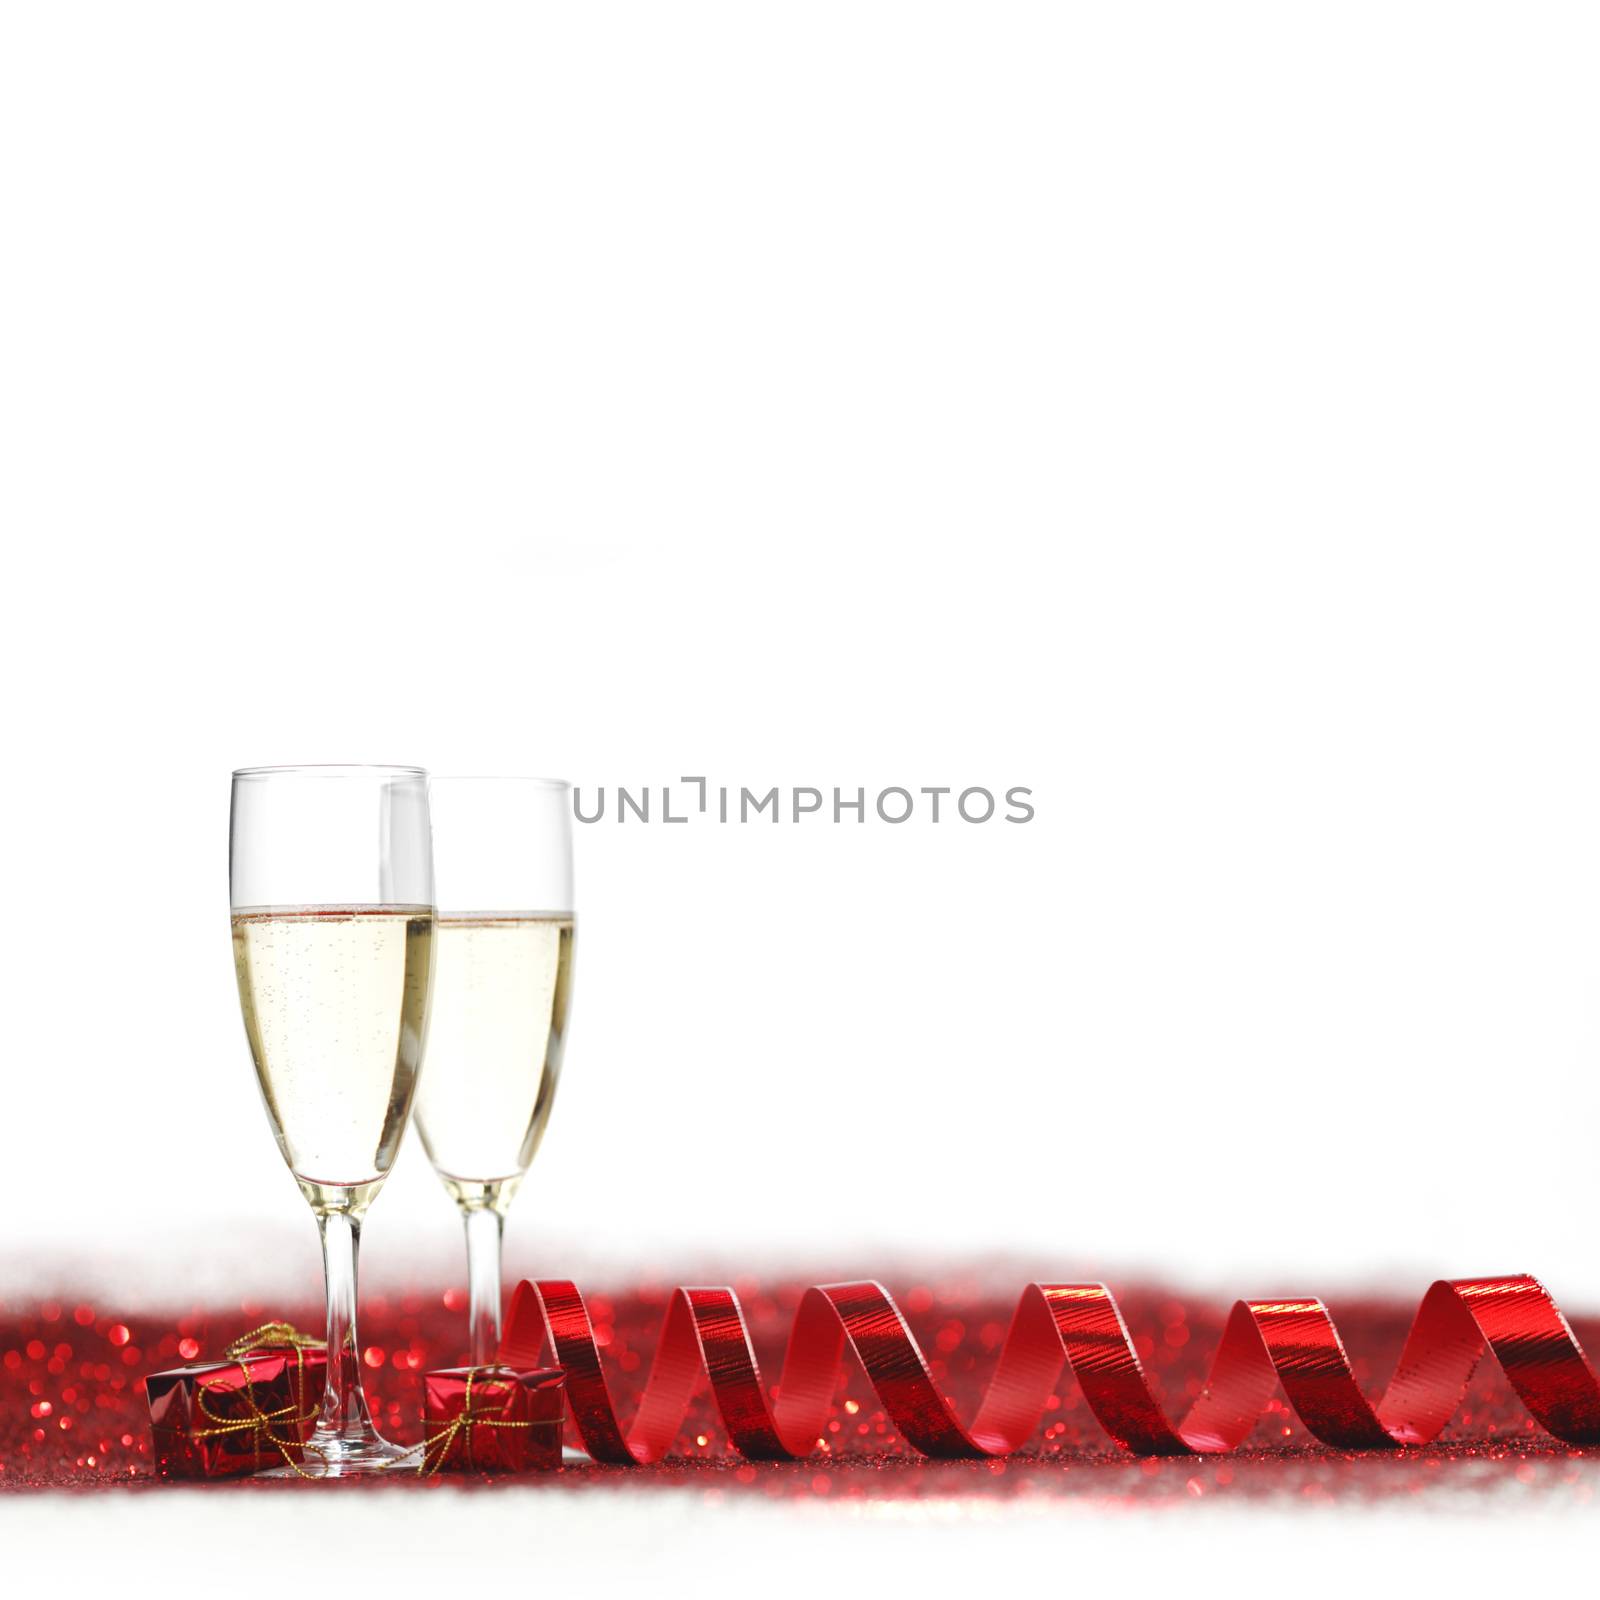 Glasses with Champagne and gifts on red glitters isolated on white background